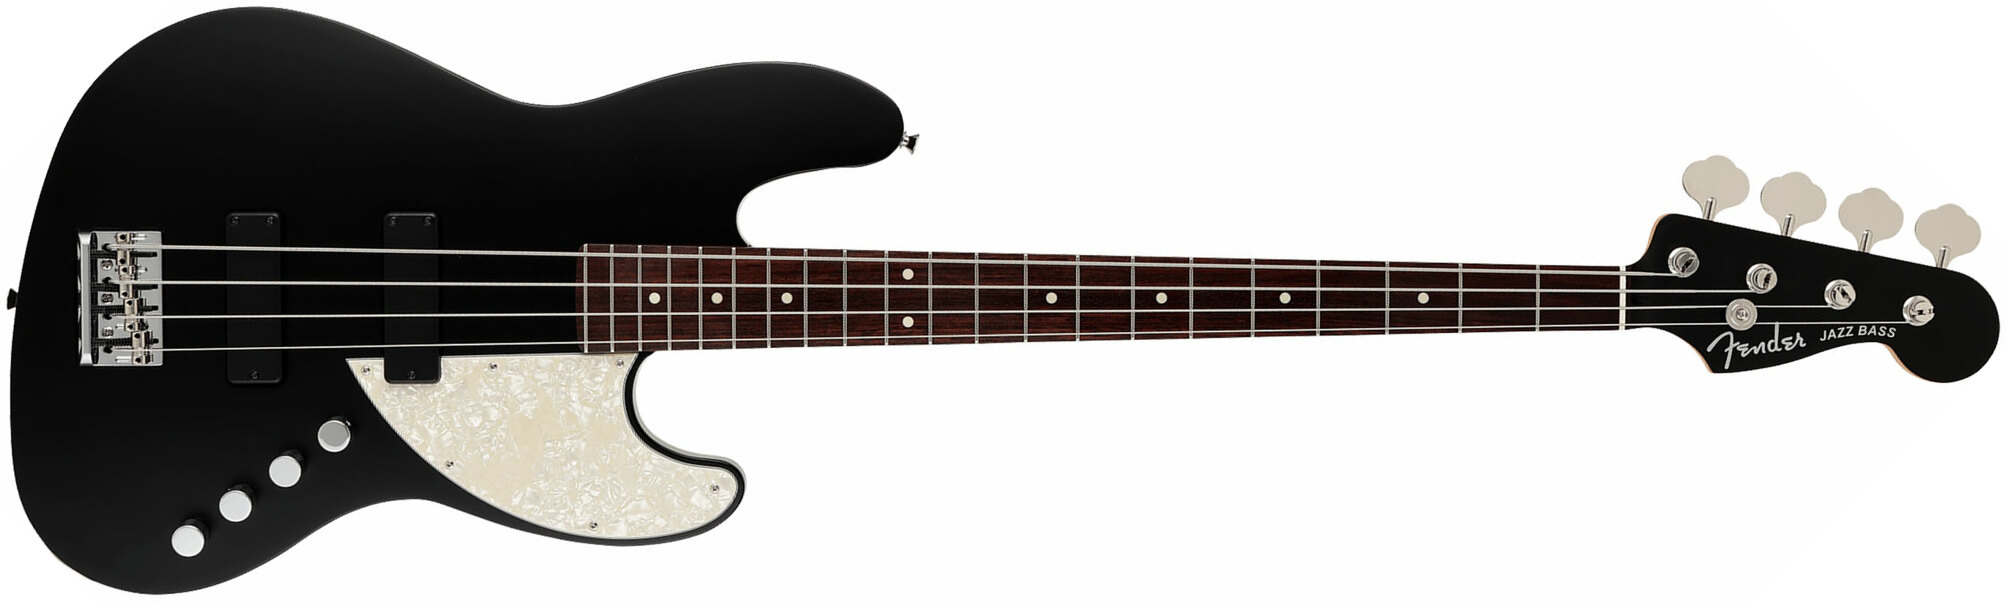 Fender Jazz Bass Elemental Mij Jap Active Rw - Stone Black - Solid body electric bass - Main picture